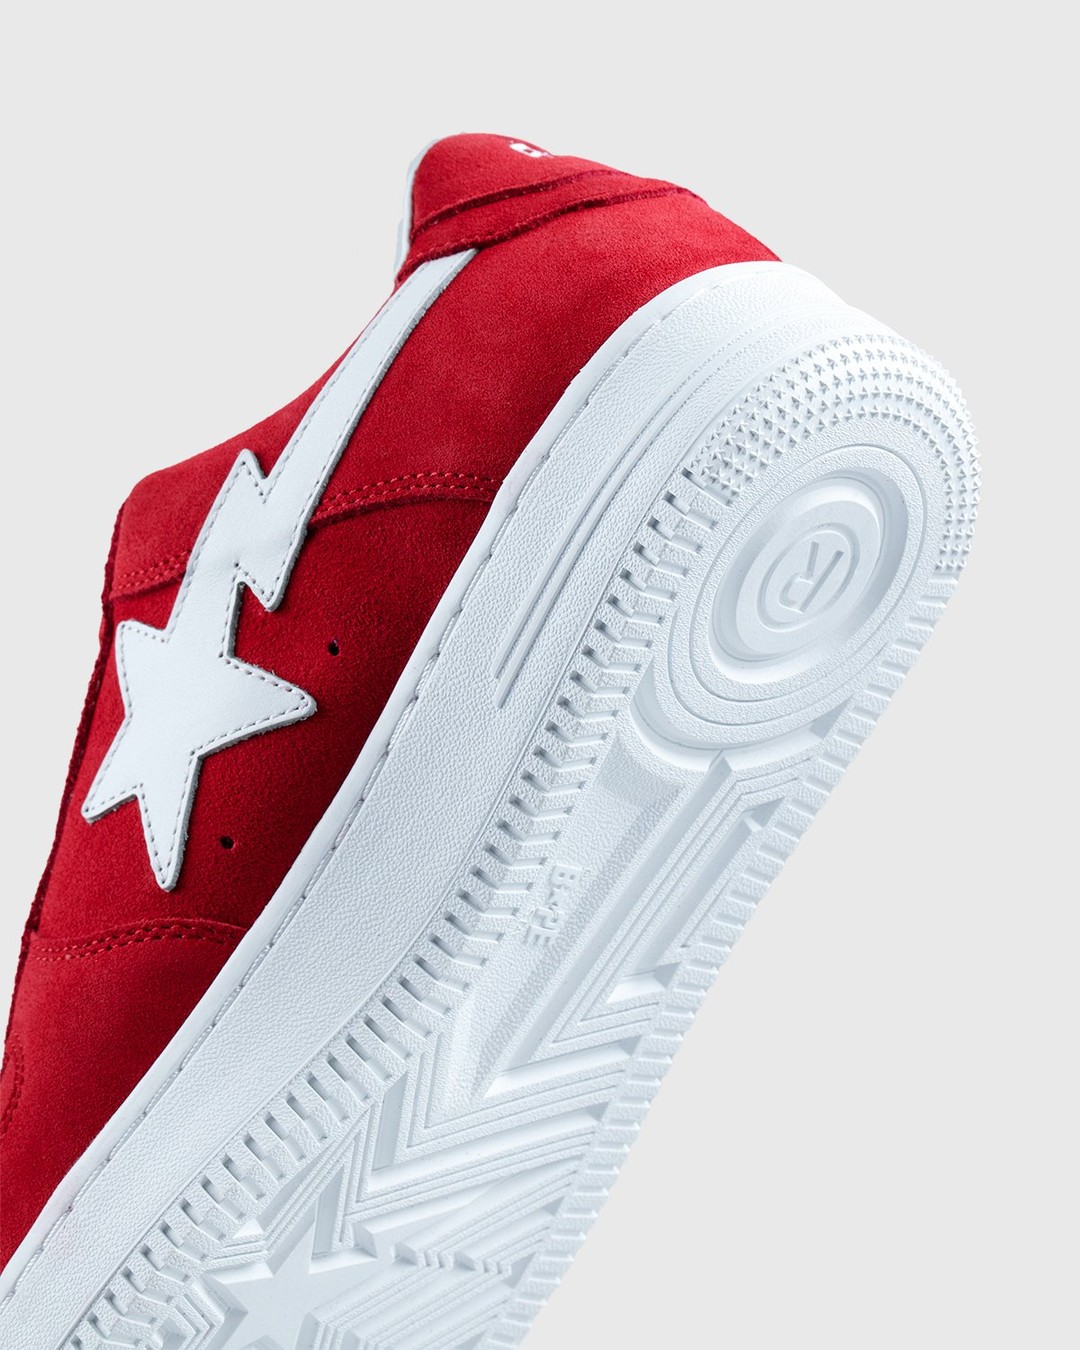 BAPE x Highsnobiety – BAPE STA Red - Low Top Sneakers - Red - Image 5